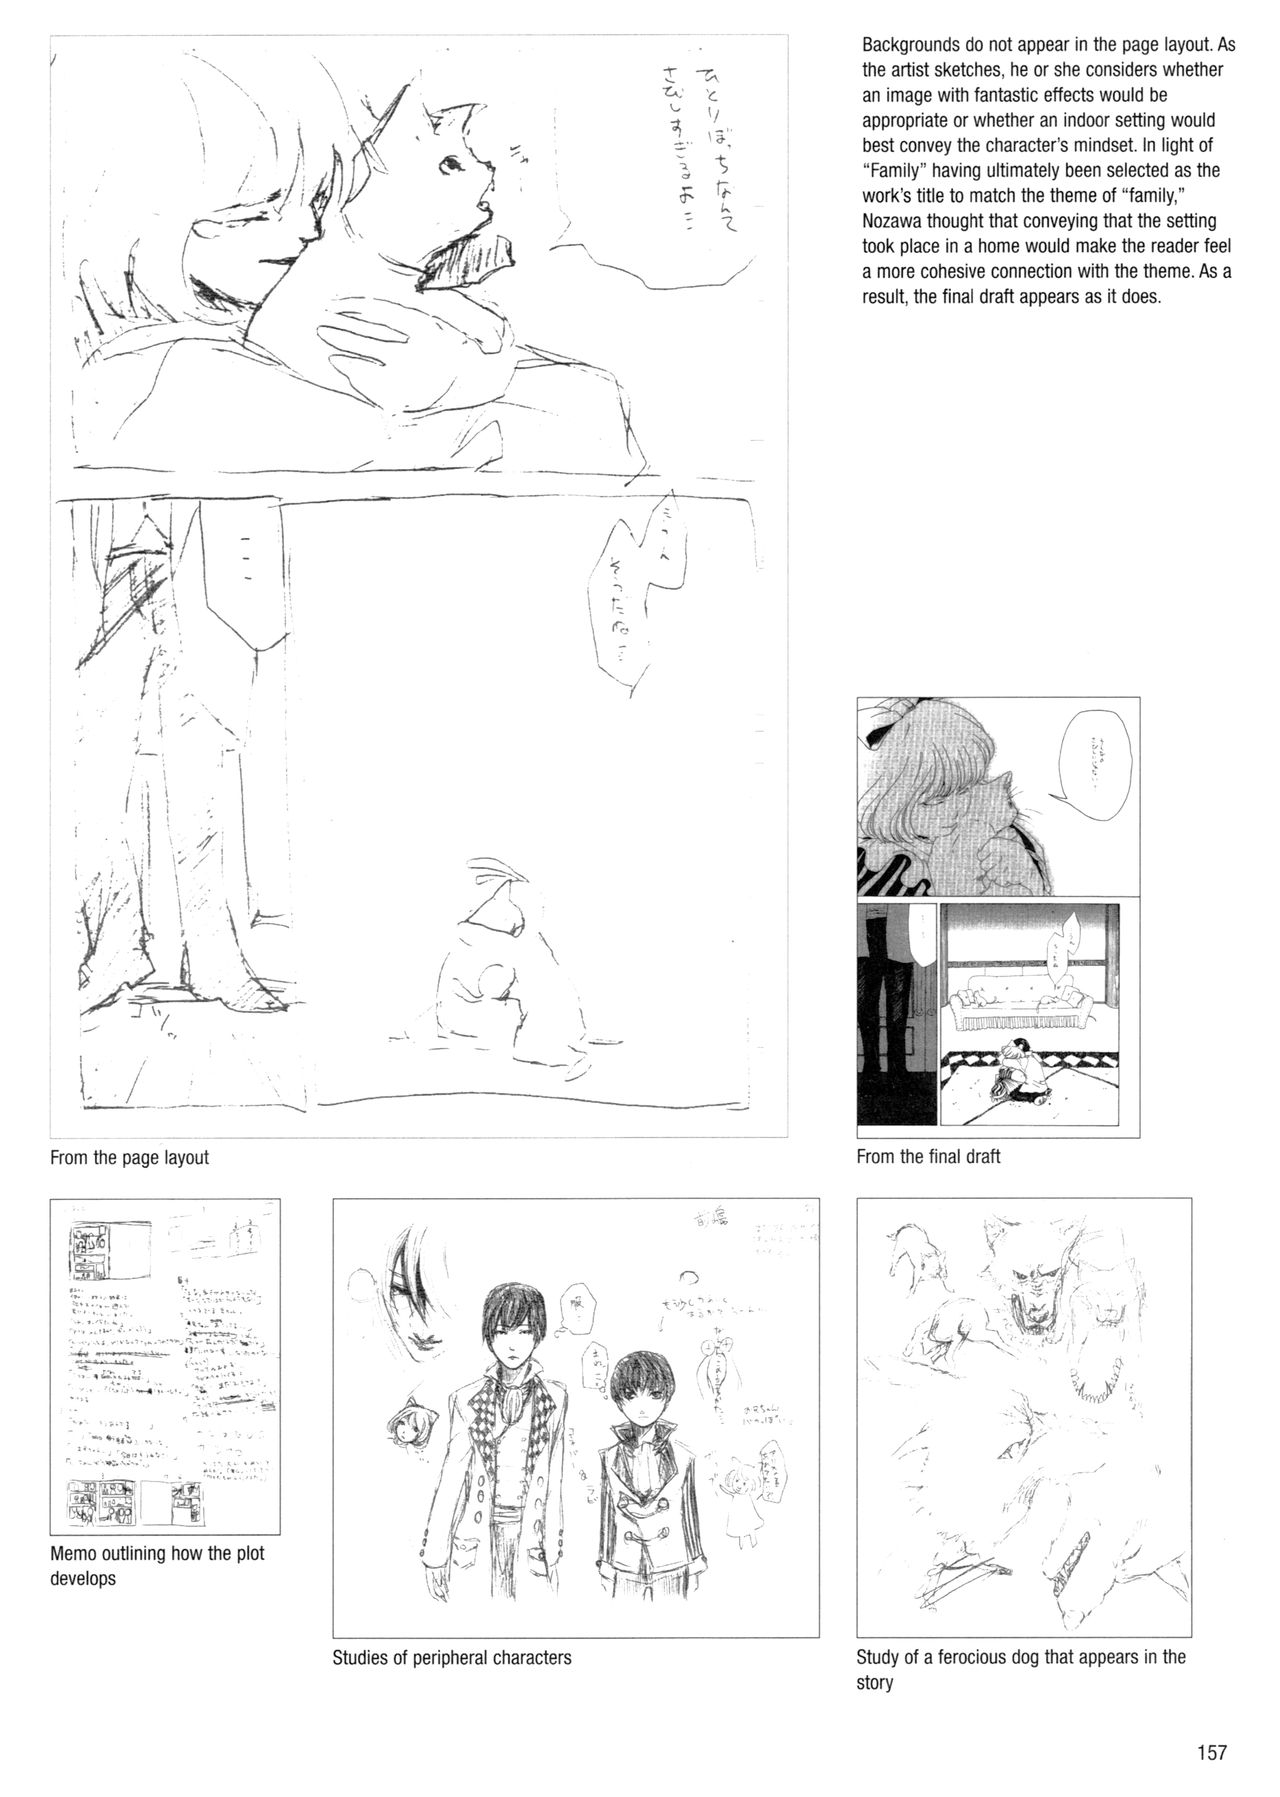 Sketching Manga-Style Vol. 3 - Unforgettable Characters 156